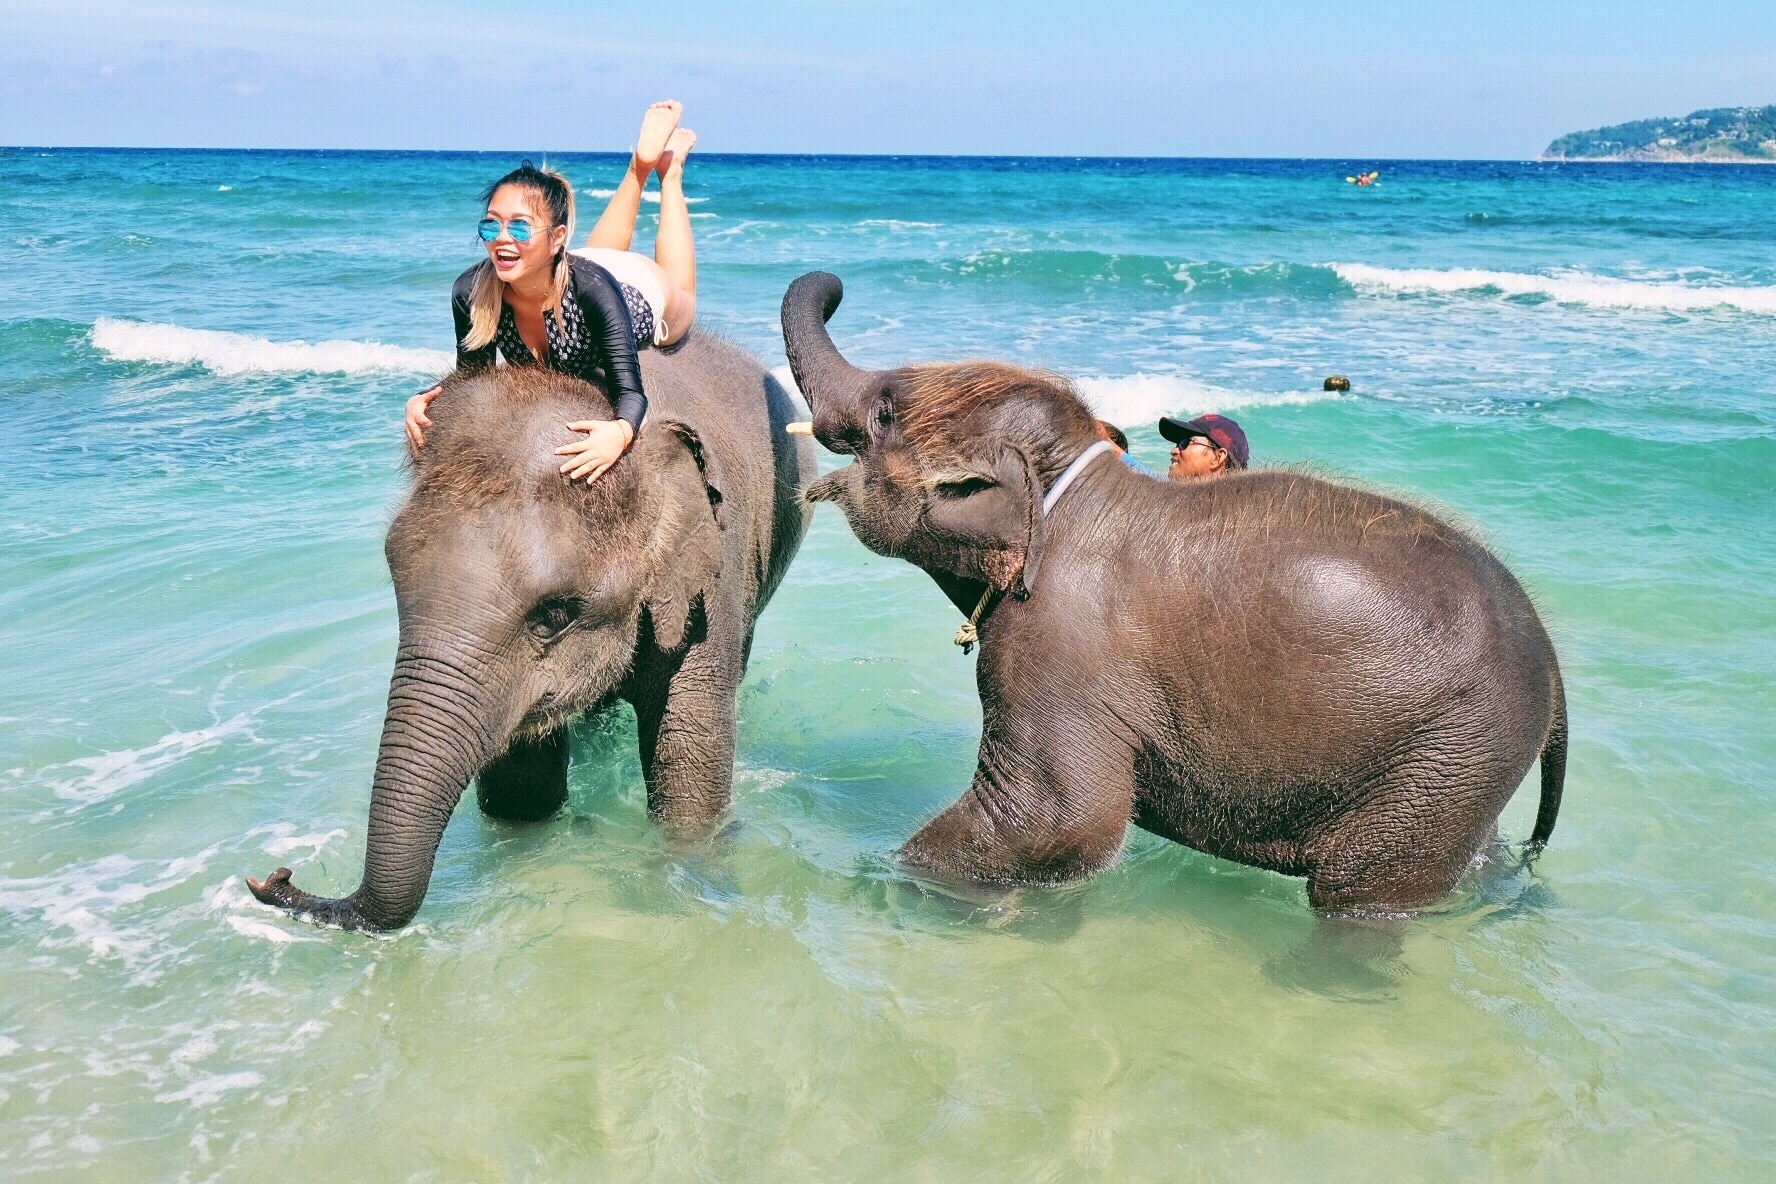 Swimming with my not so small beach babes🐘